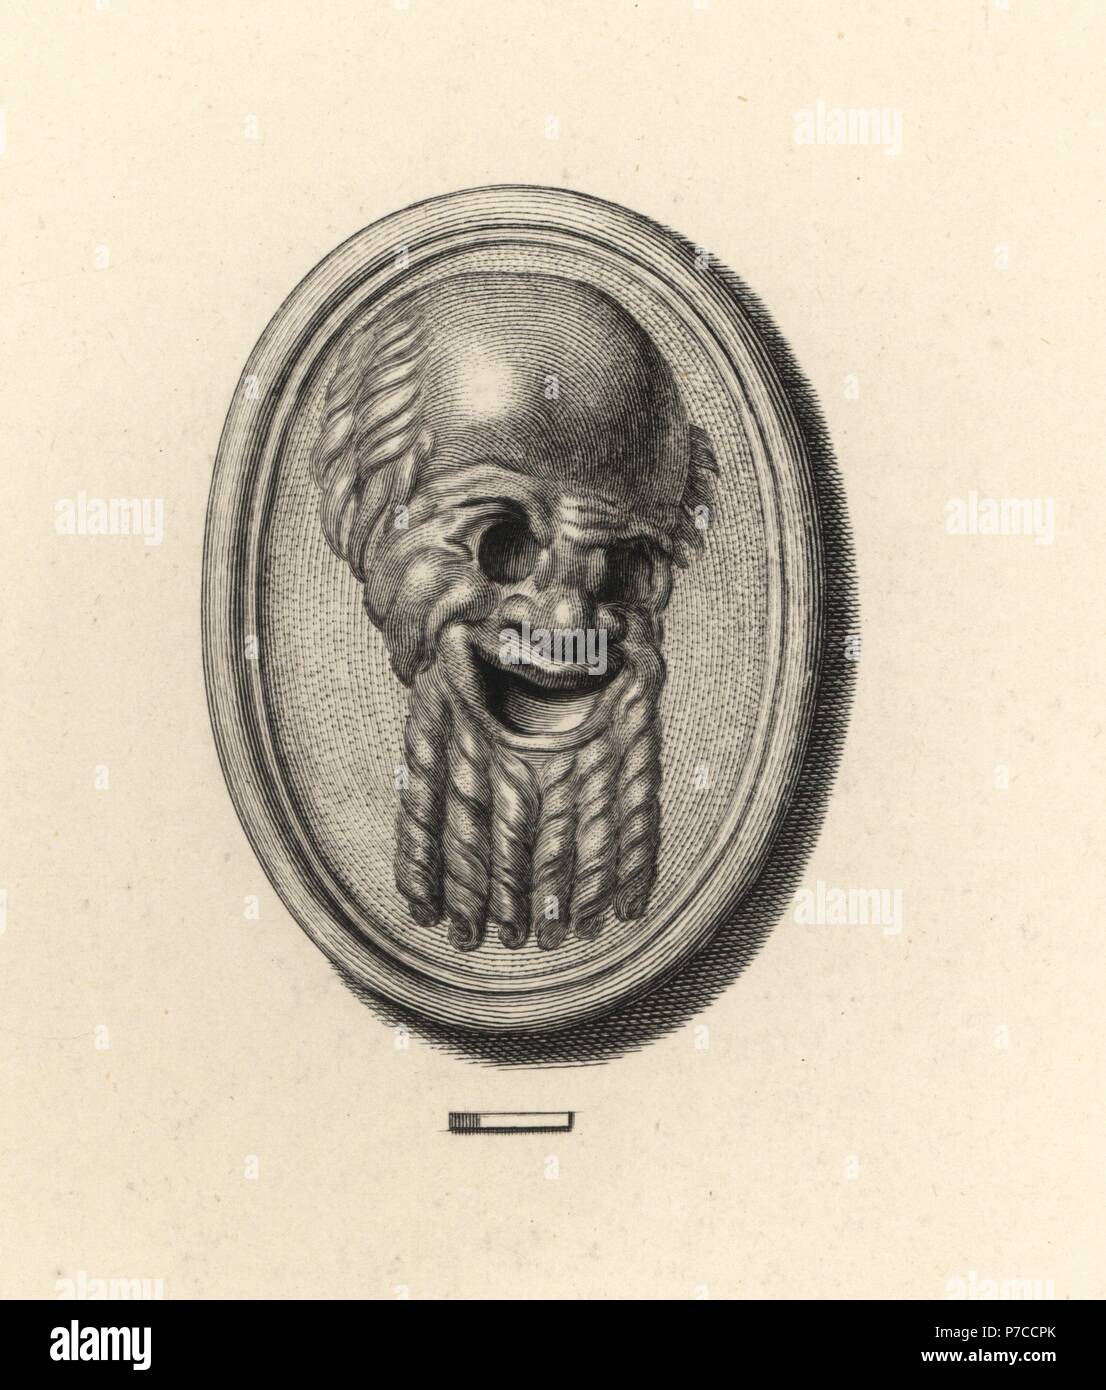 Mask of Silenus, satyr tutor of Dionysus, Greek god of wine. Copperplate engraving by Francesco Bartolozzi from 108 Plates of Antique Gems, 1860. The gems were from the Duke of Marlborough's collection. Stock Photo